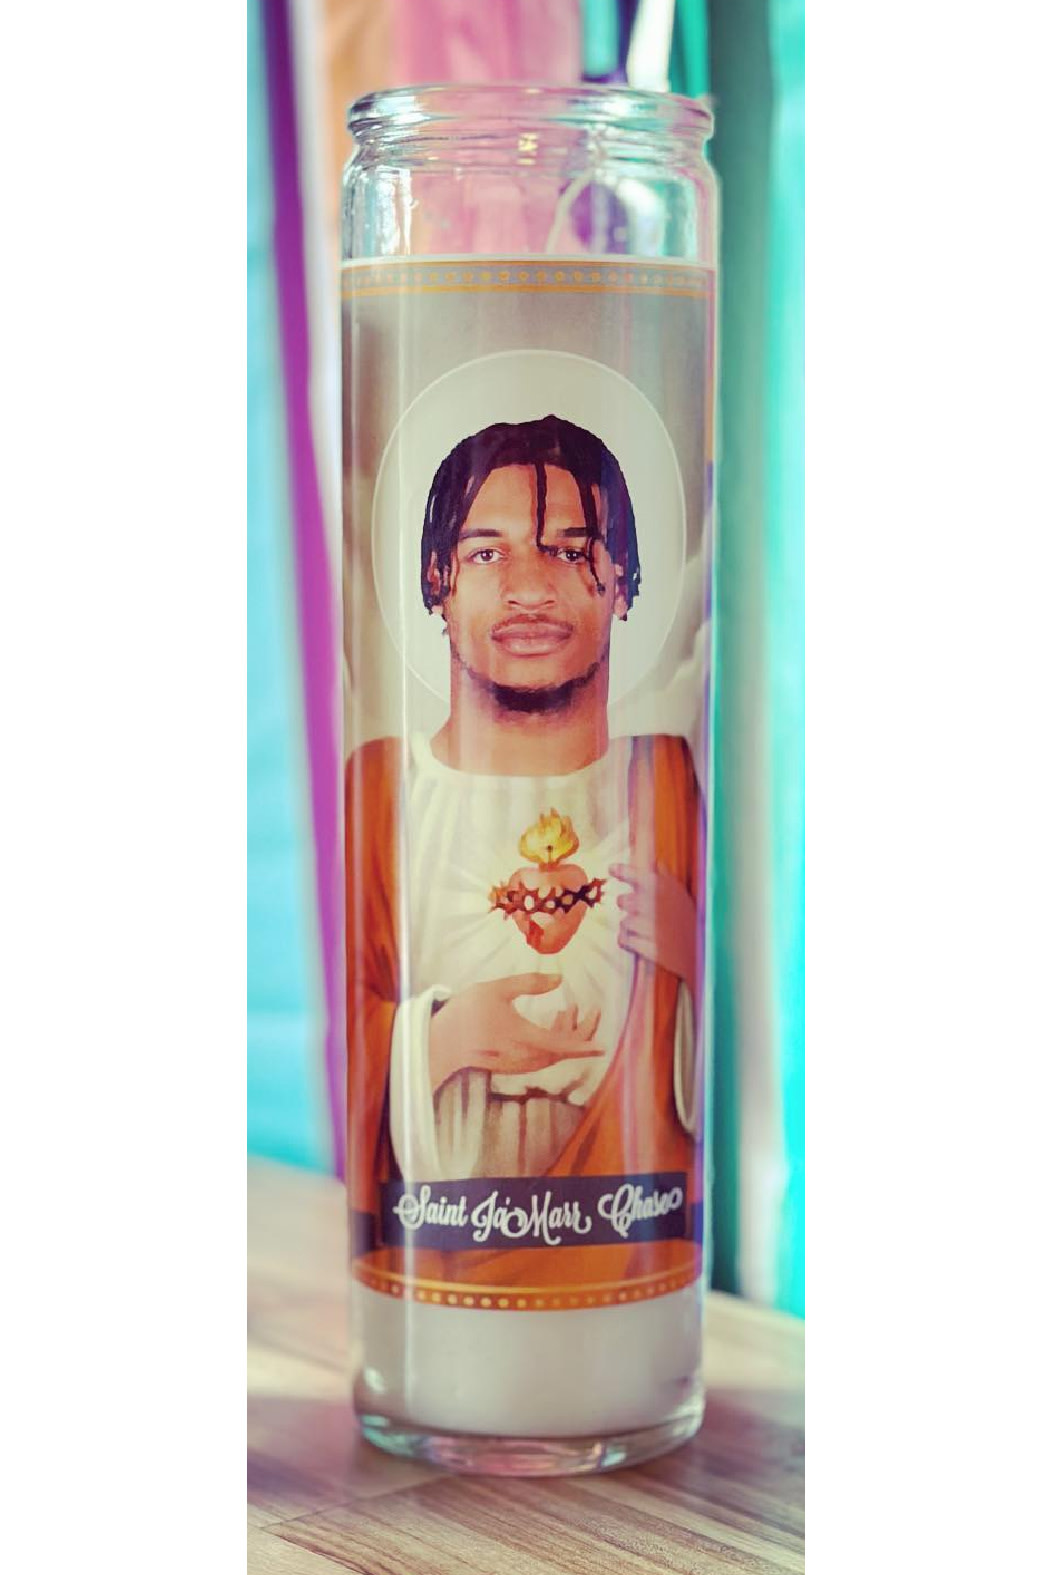 The Luminary and Co. Ja’Marr Chase candle